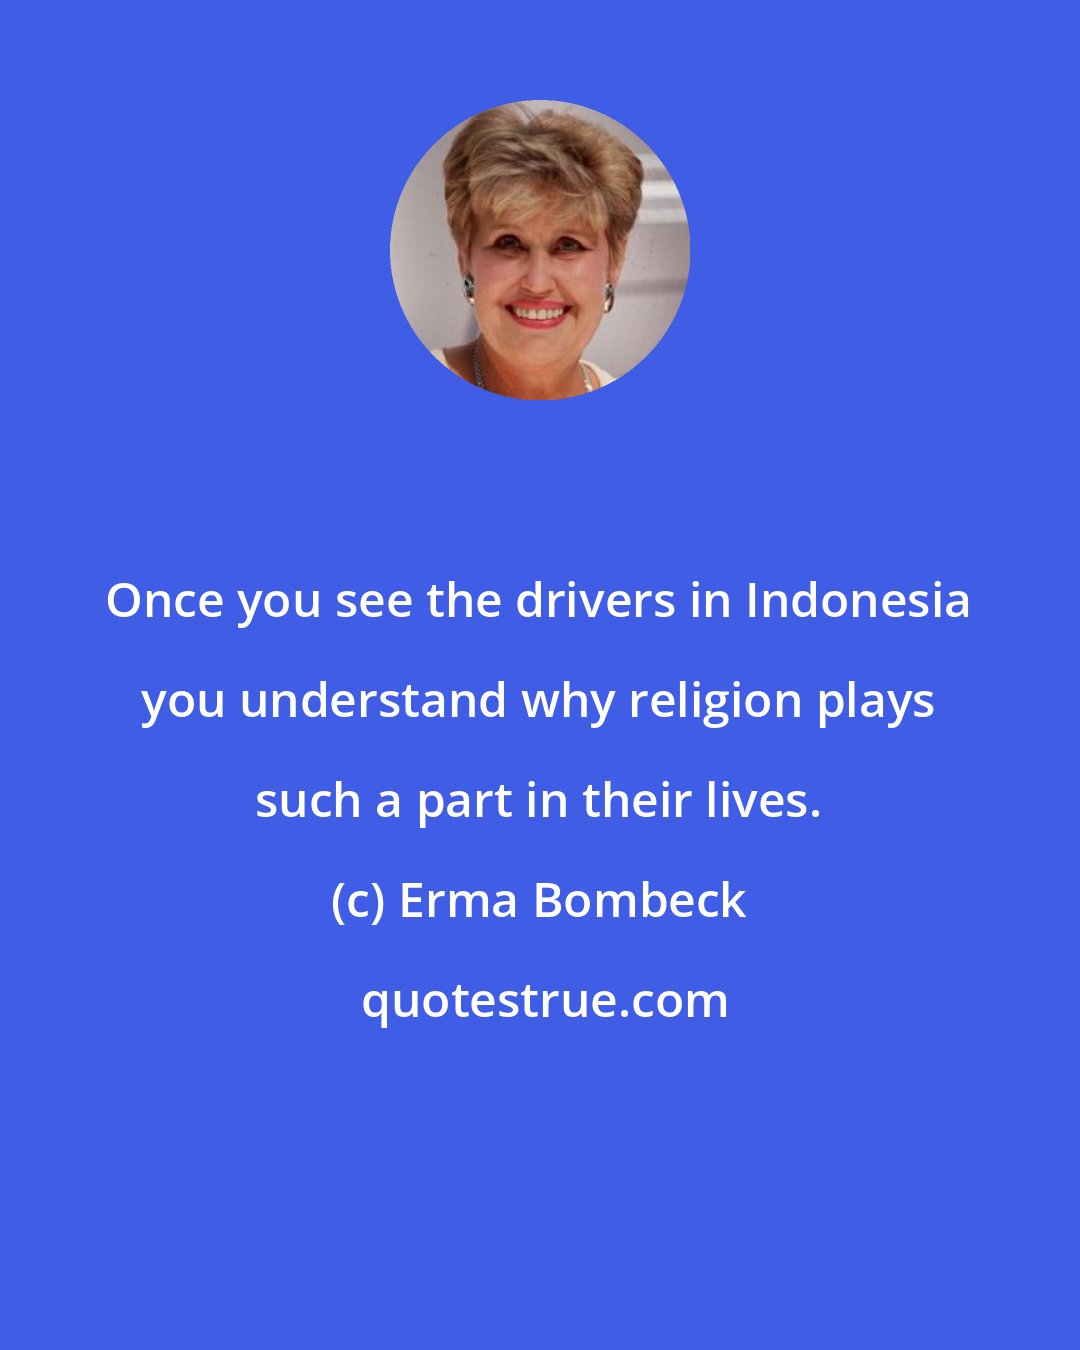 Erma Bombeck: Once you see the drivers in Indonesia you understand why religion plays such a part in their lives.